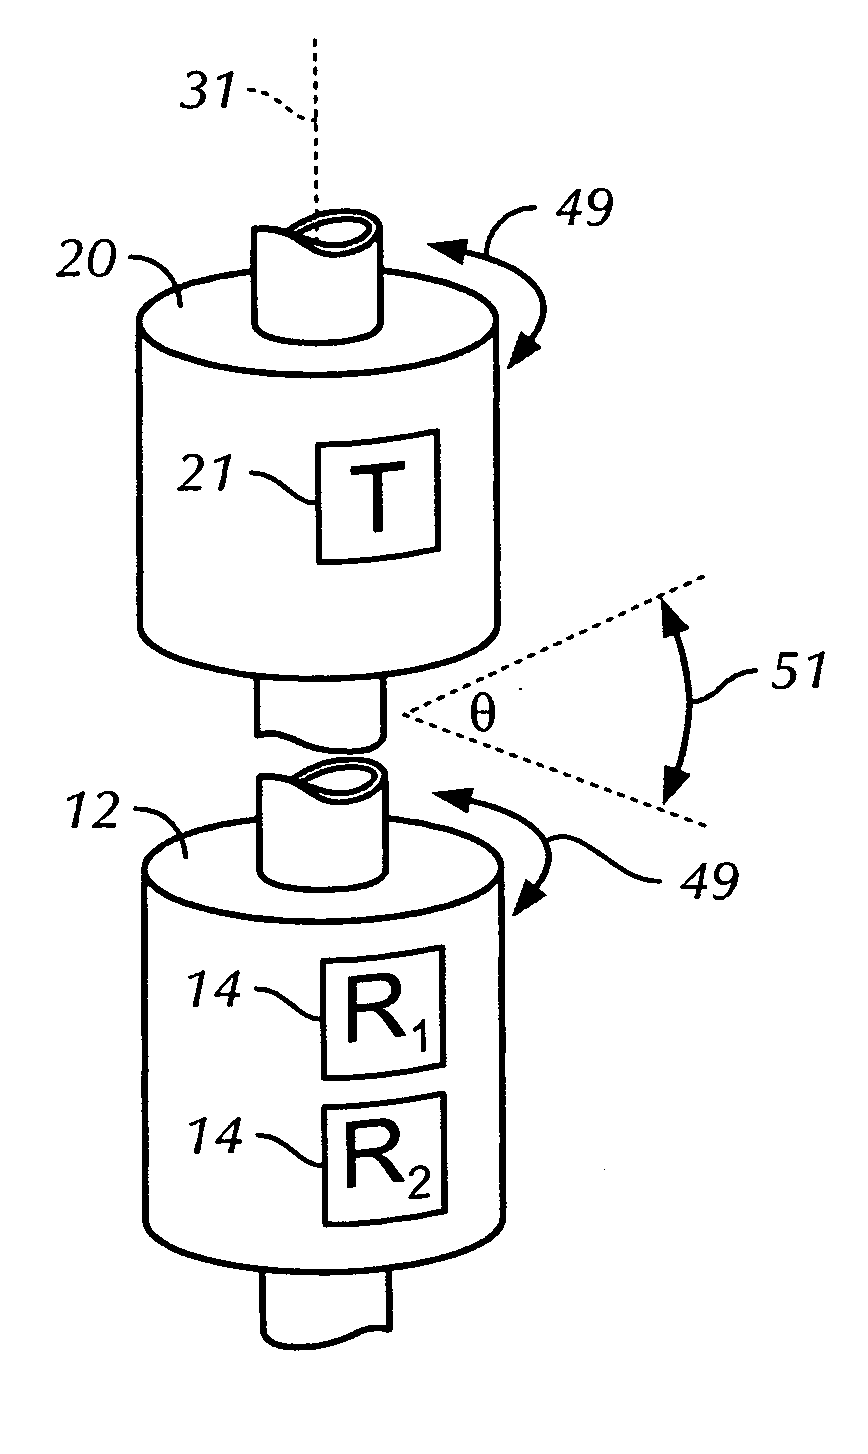 Method and apparatus for azimuthal logging of shear waves in boreholes using optionally rotatable transmitter and receiver assemblies